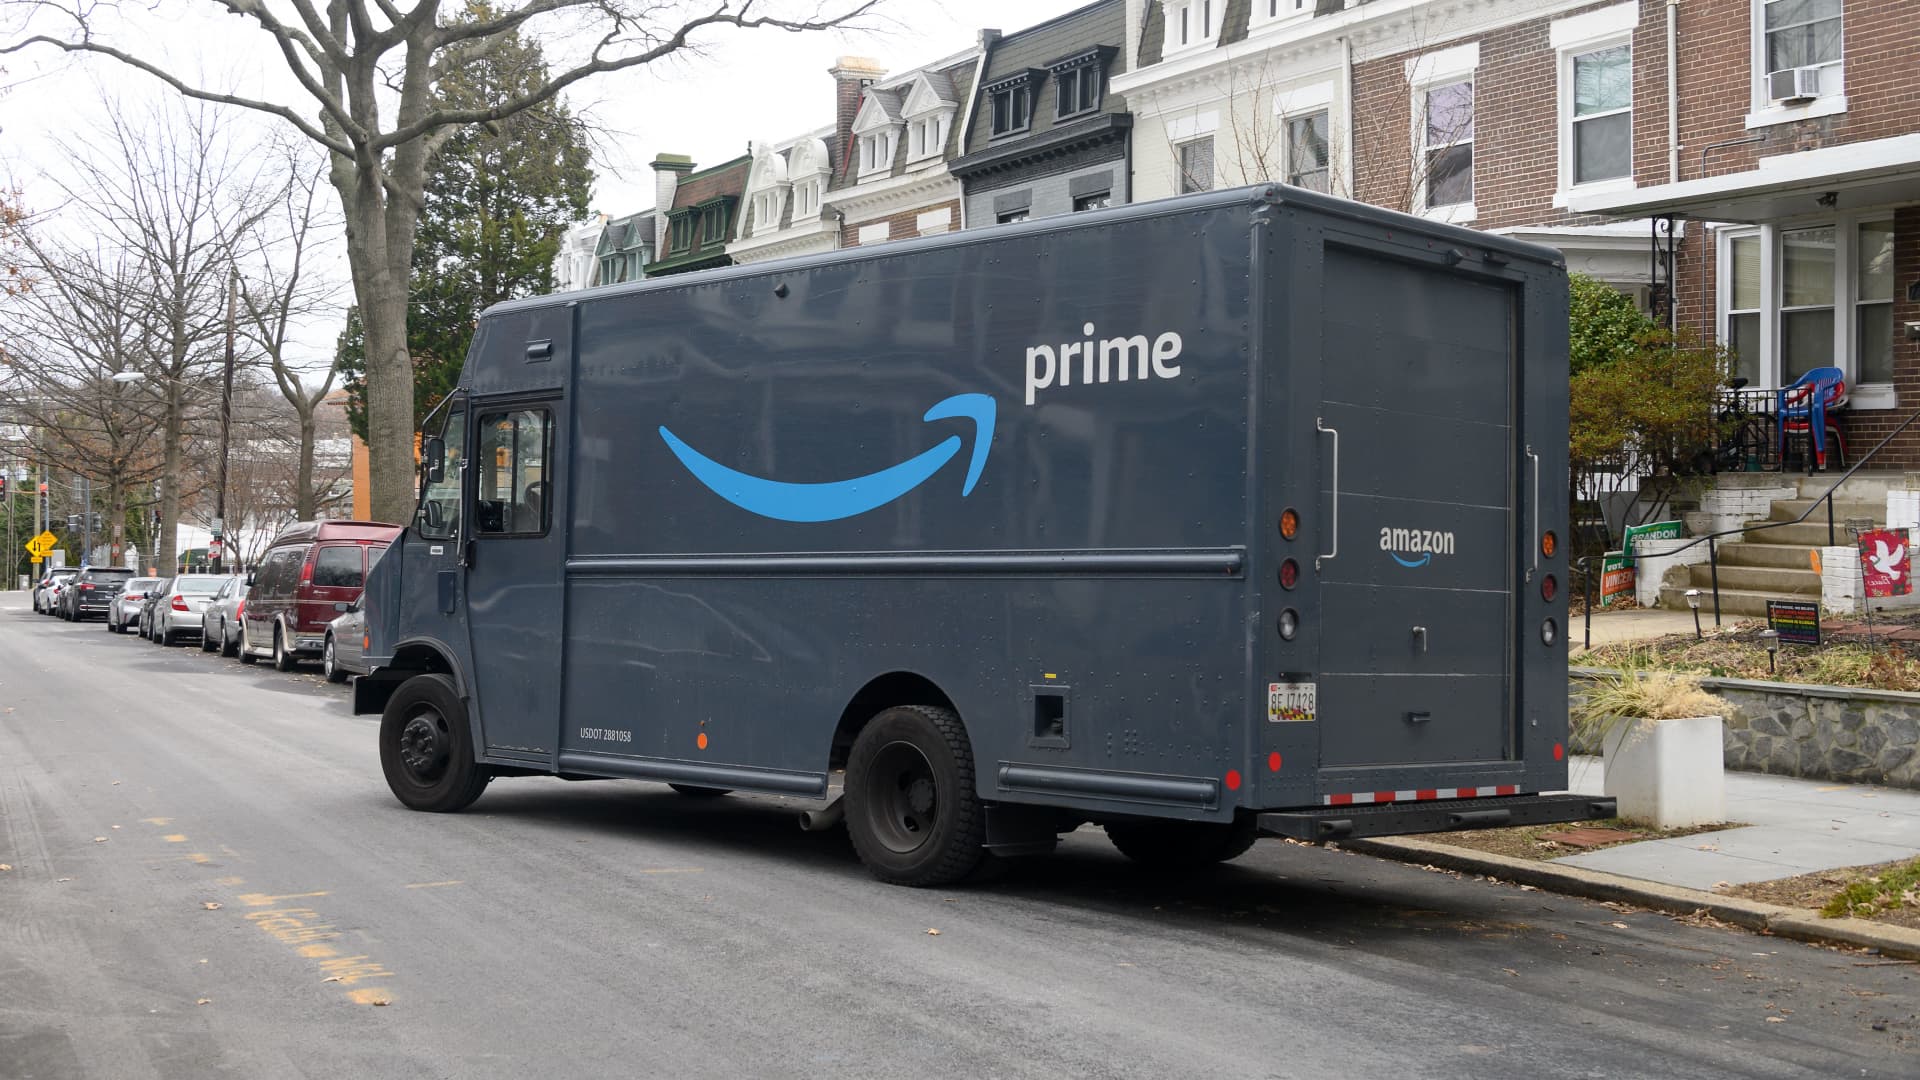 Prime Early Access Sale is coming up — here's how to get Amazon Prime membership for free